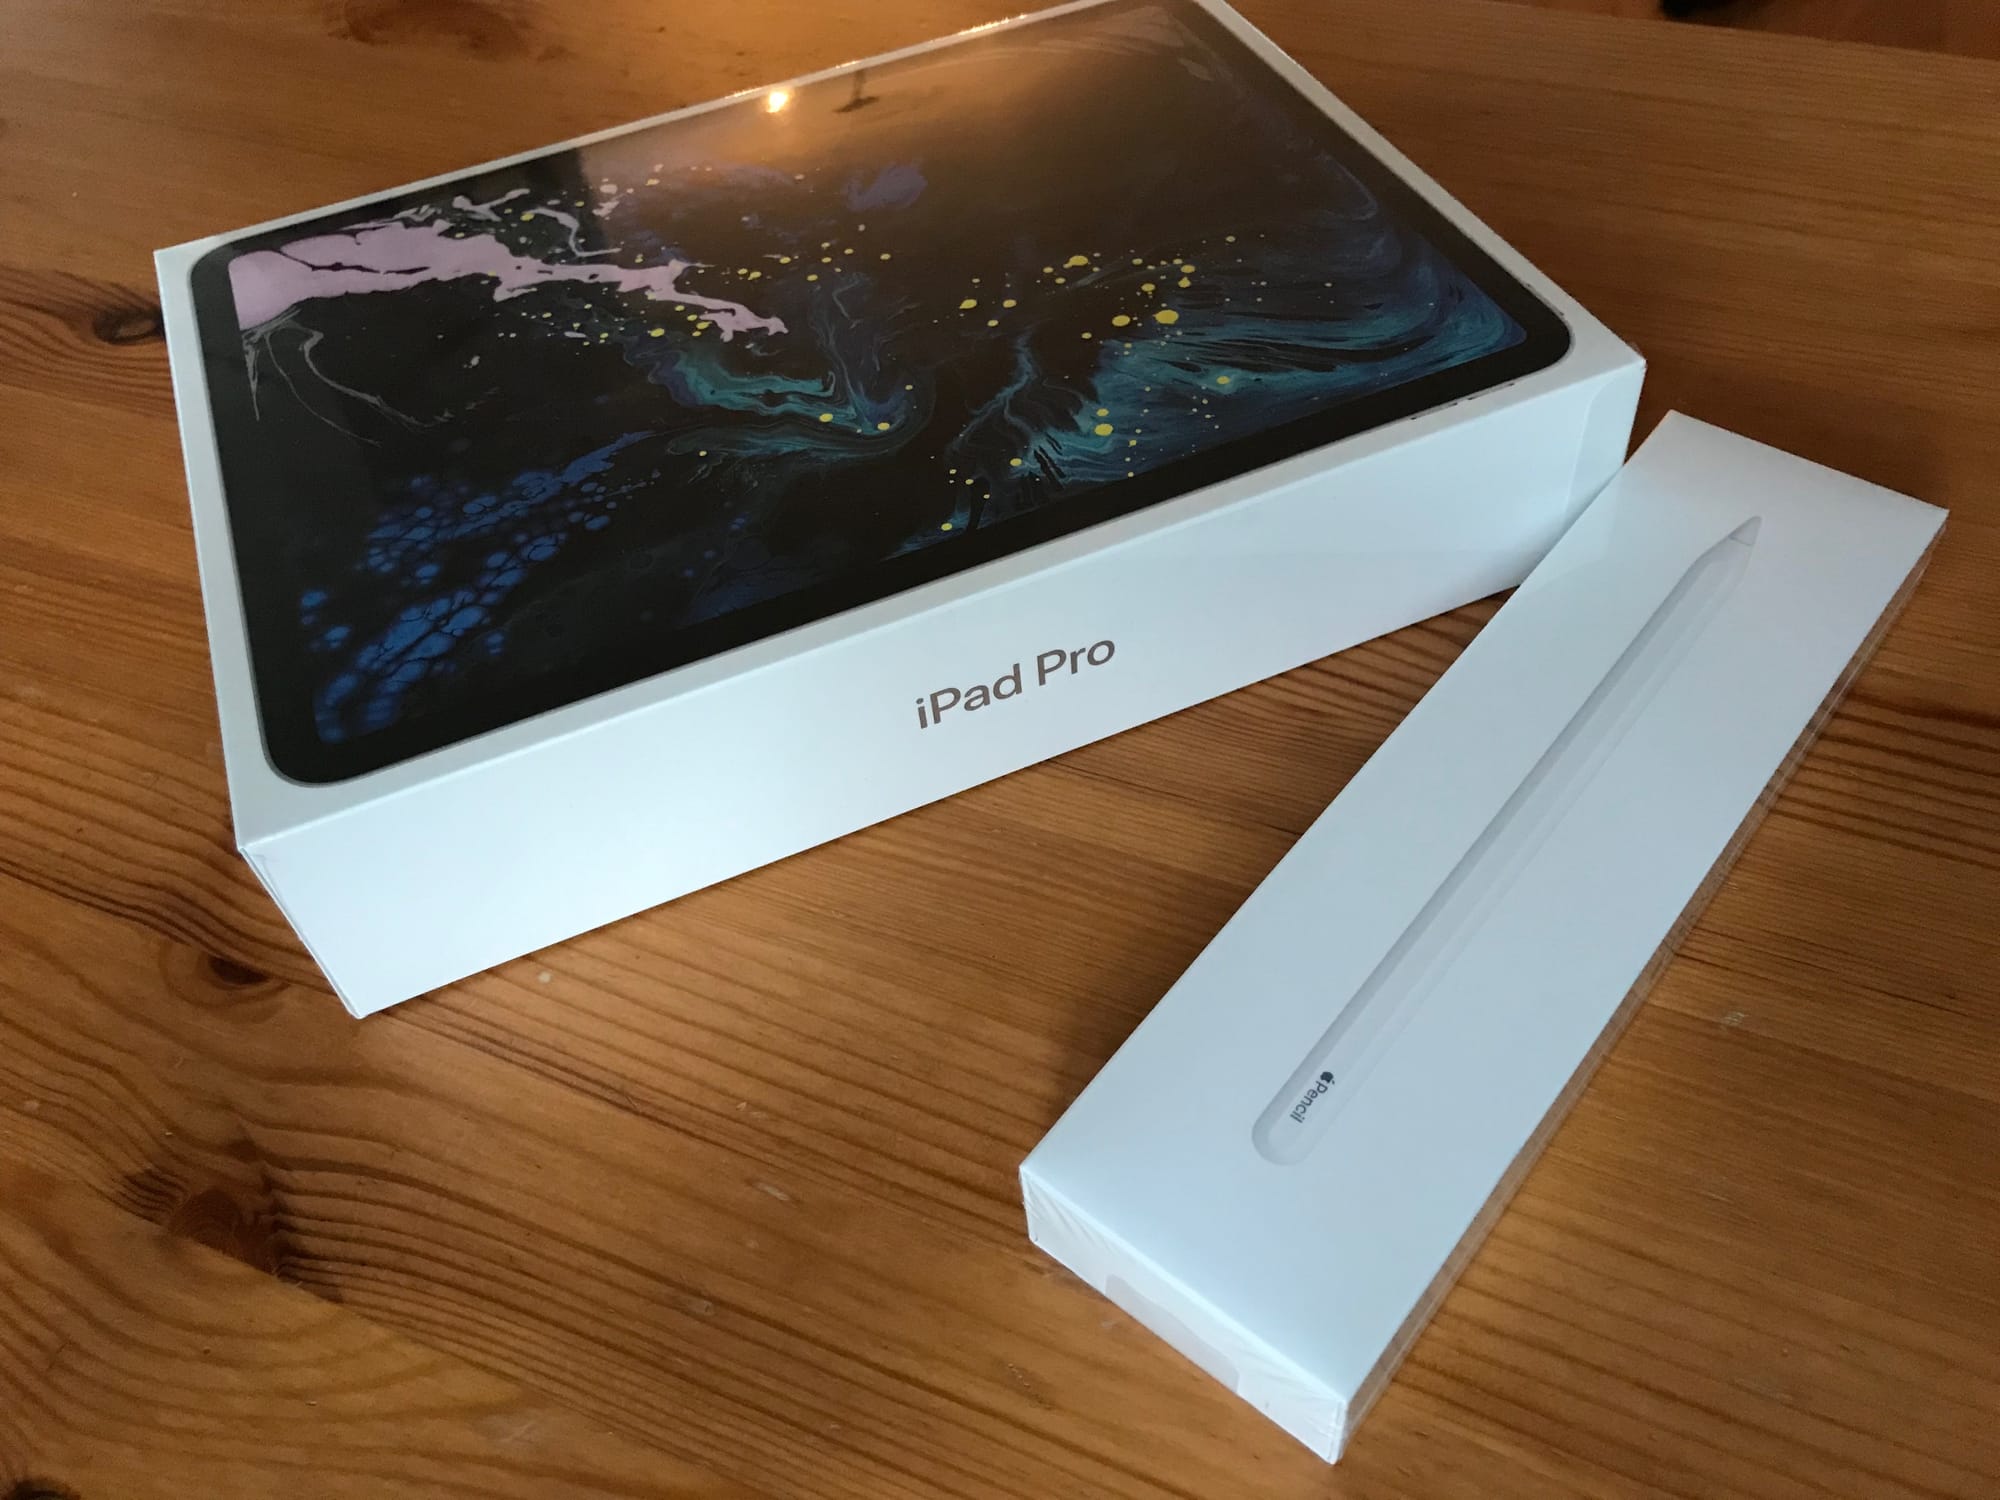 Short Thoughts on Every iPad I Owned and What’s Next